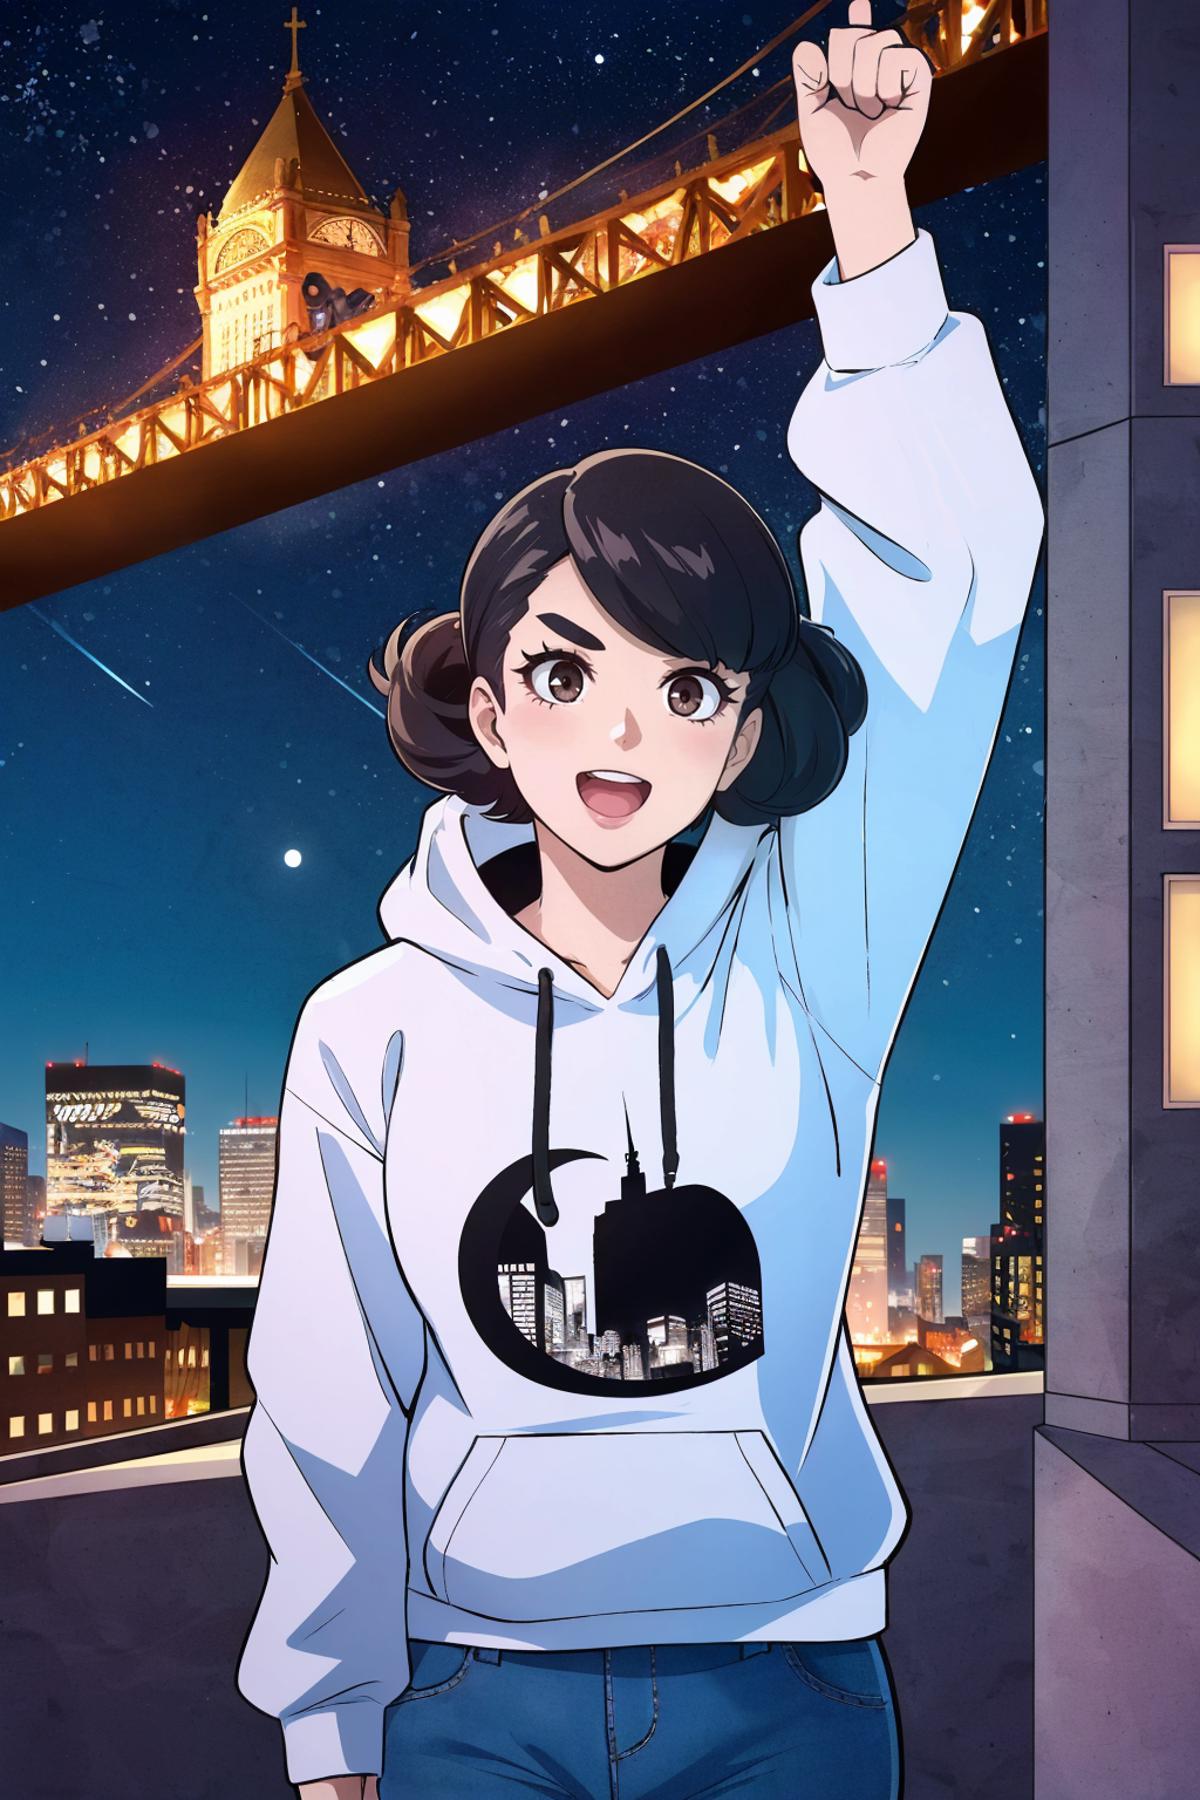 A Girl in a White Sweatshirt Raising Her Hand with a Cityscape in the Background.